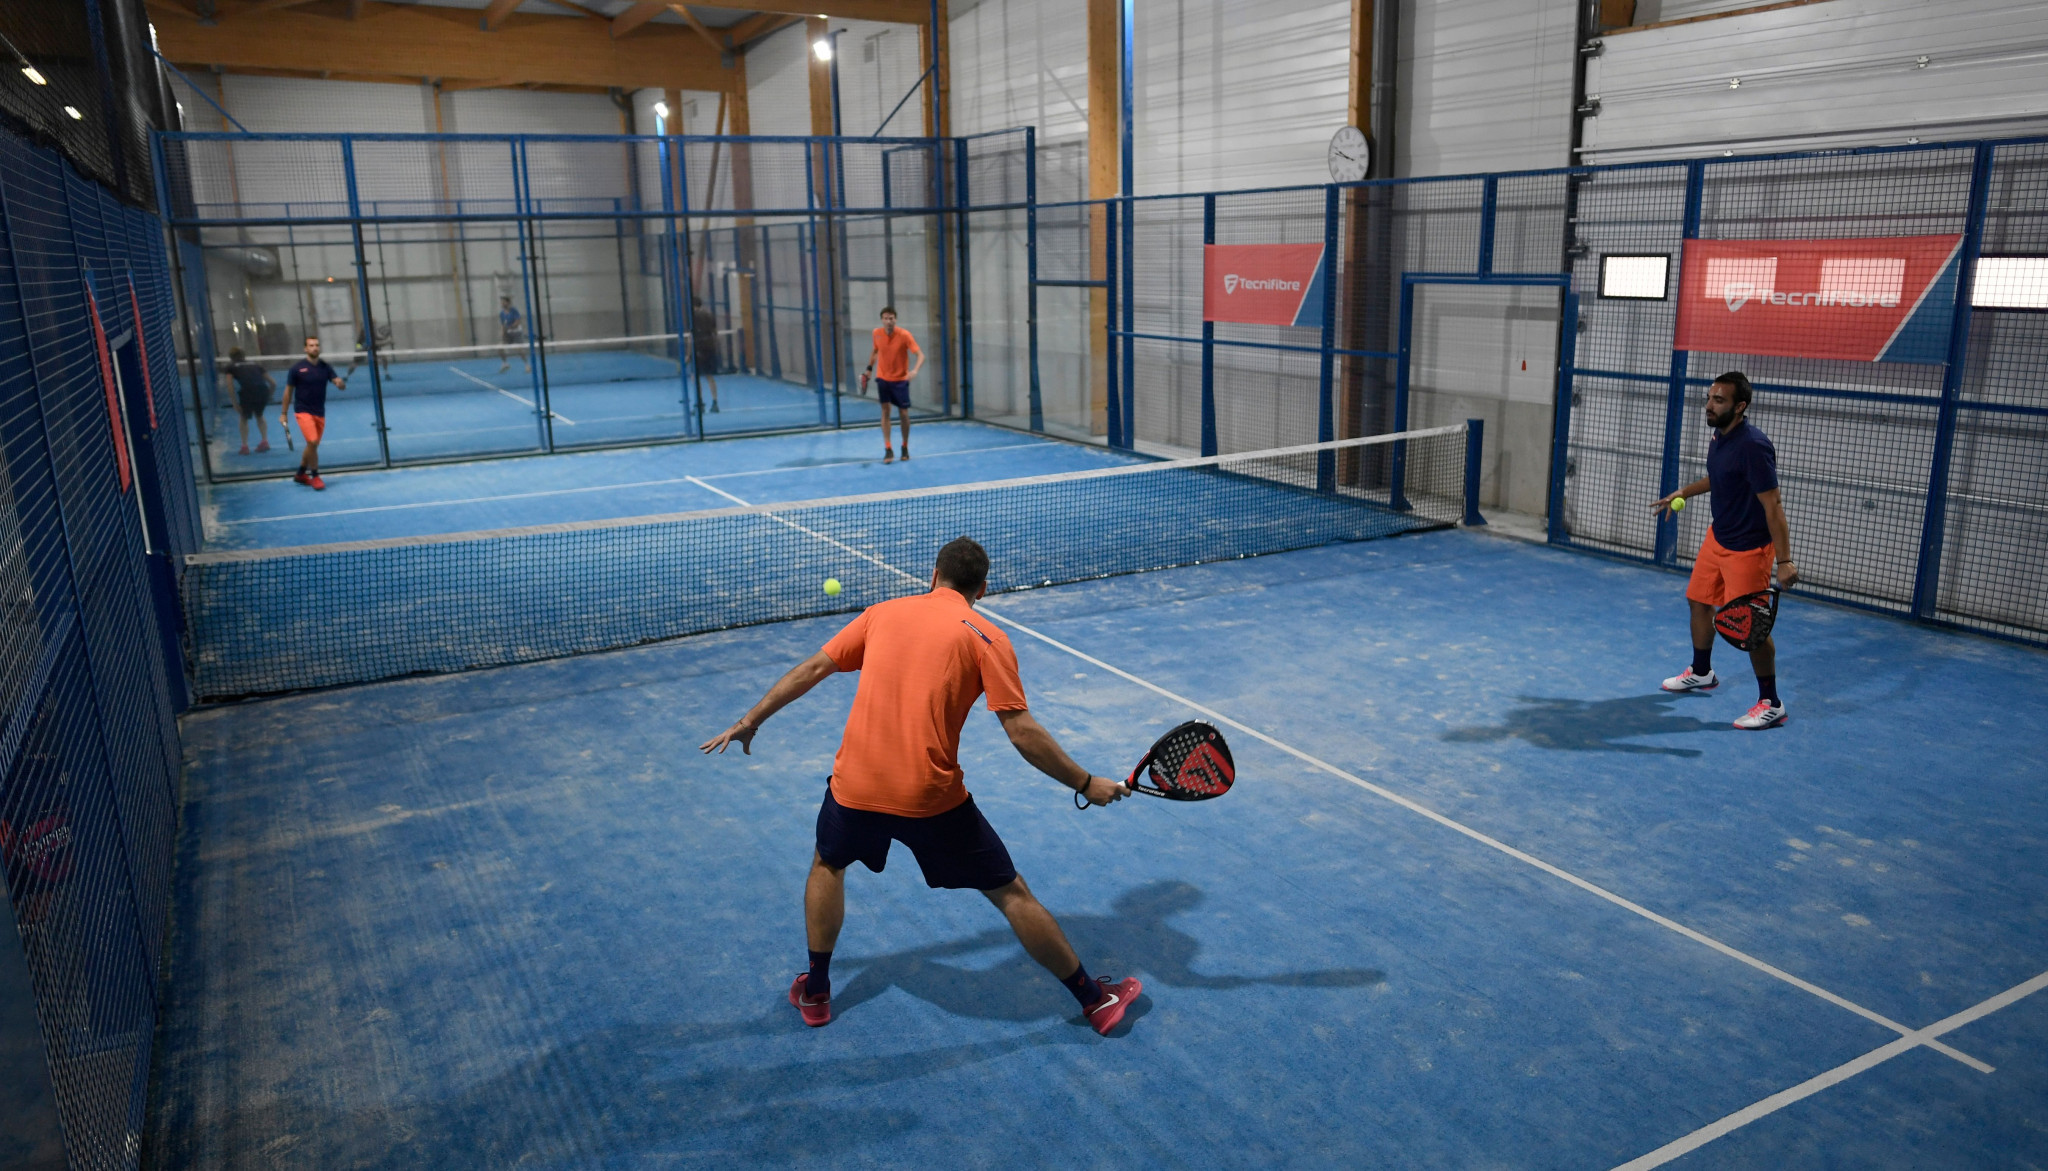 The International Padel Federation claims the sport is facing a "hostile takeover" ©Getty Images